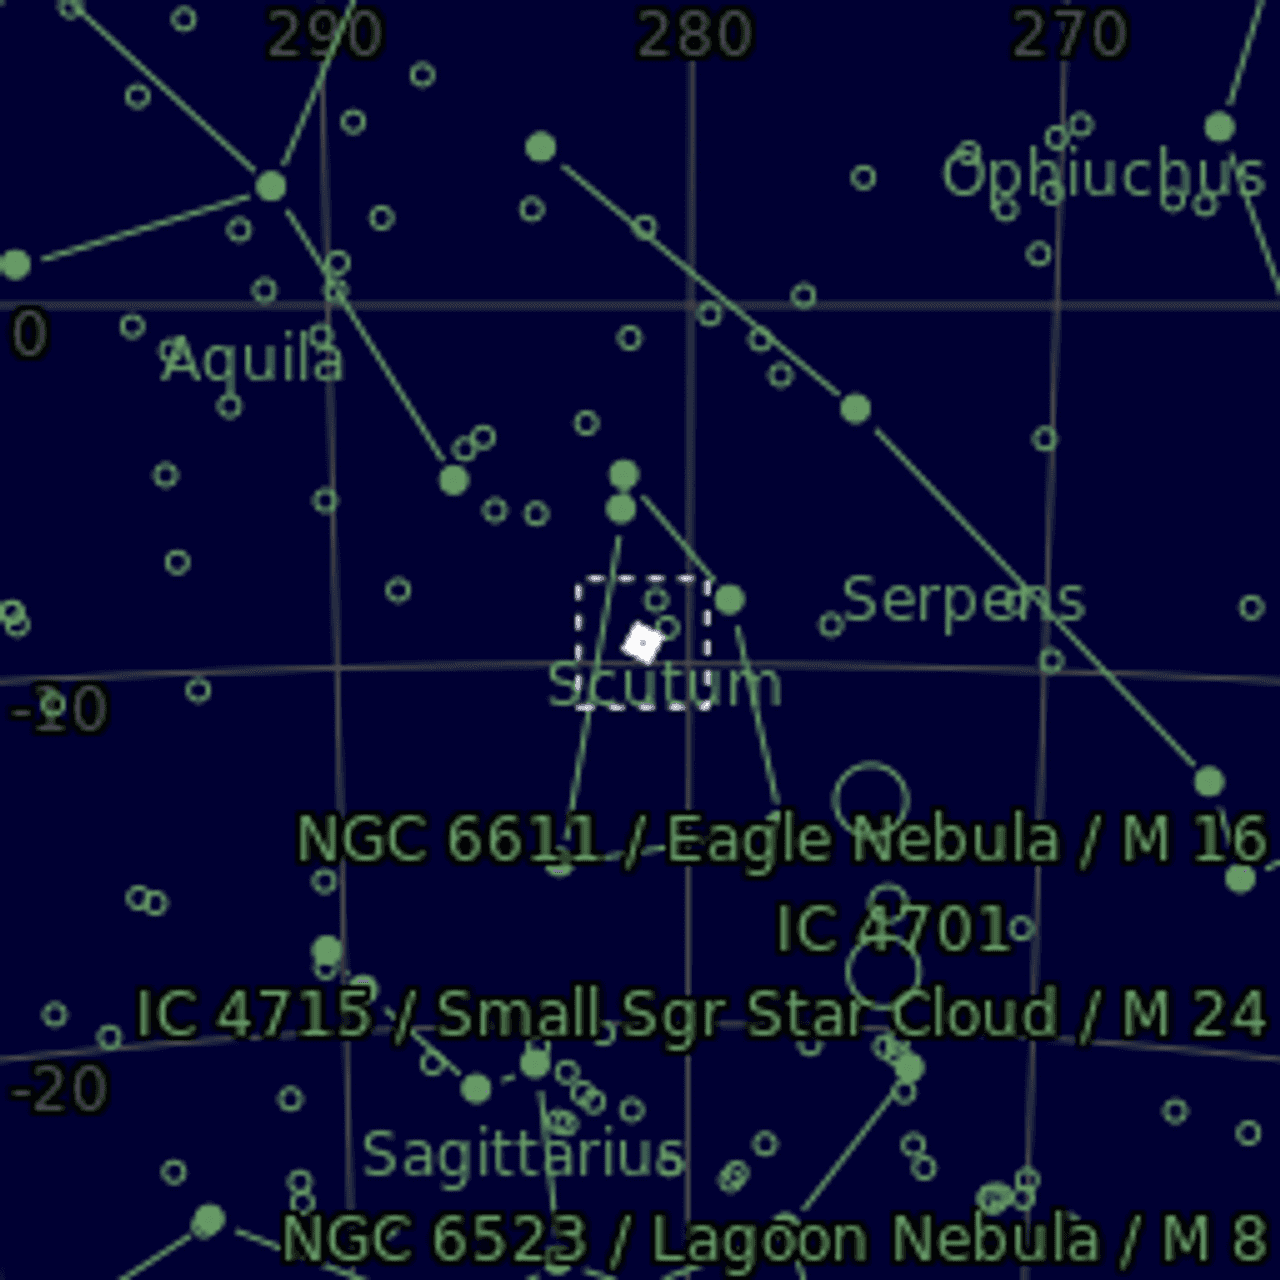 Star map of M26